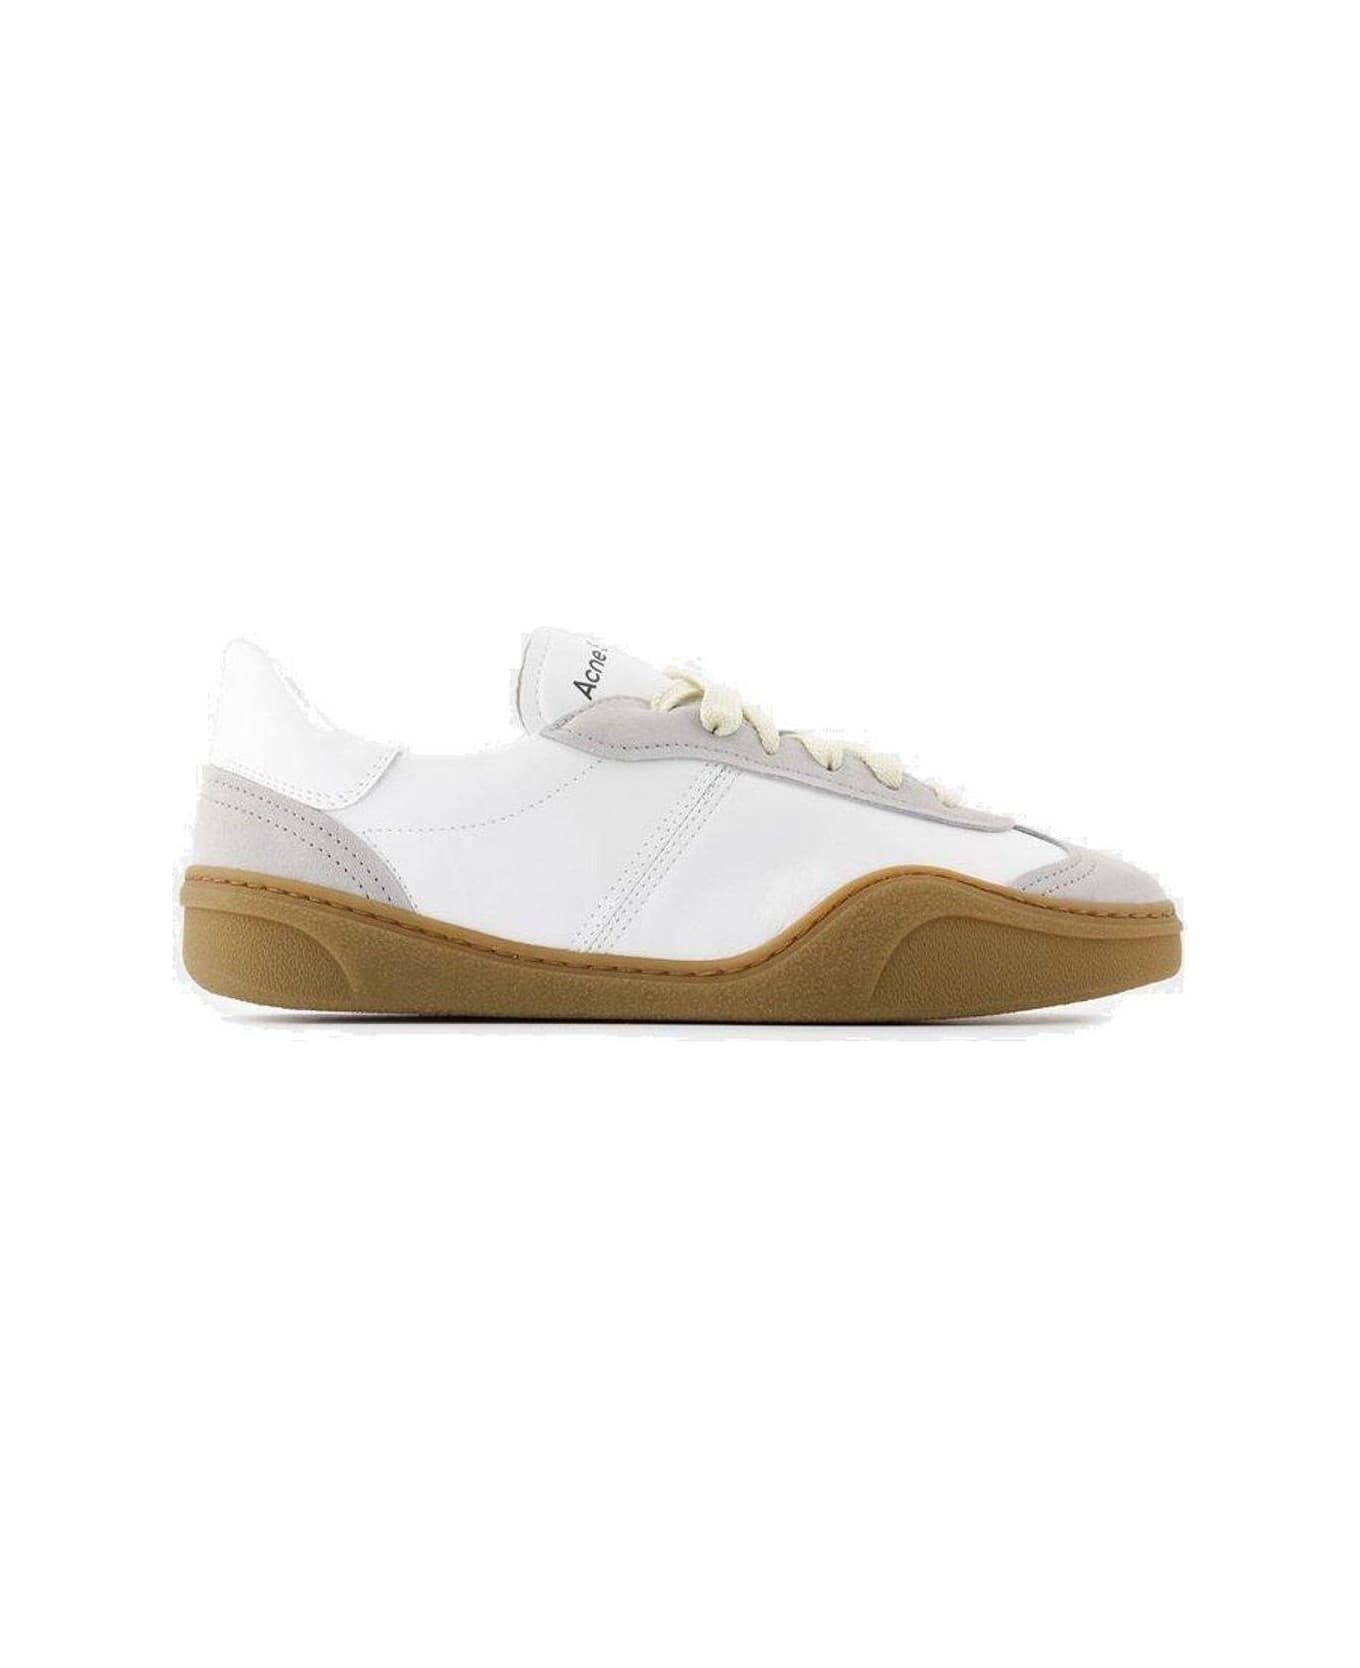 Acne Studios Lace-up Sneakers - White